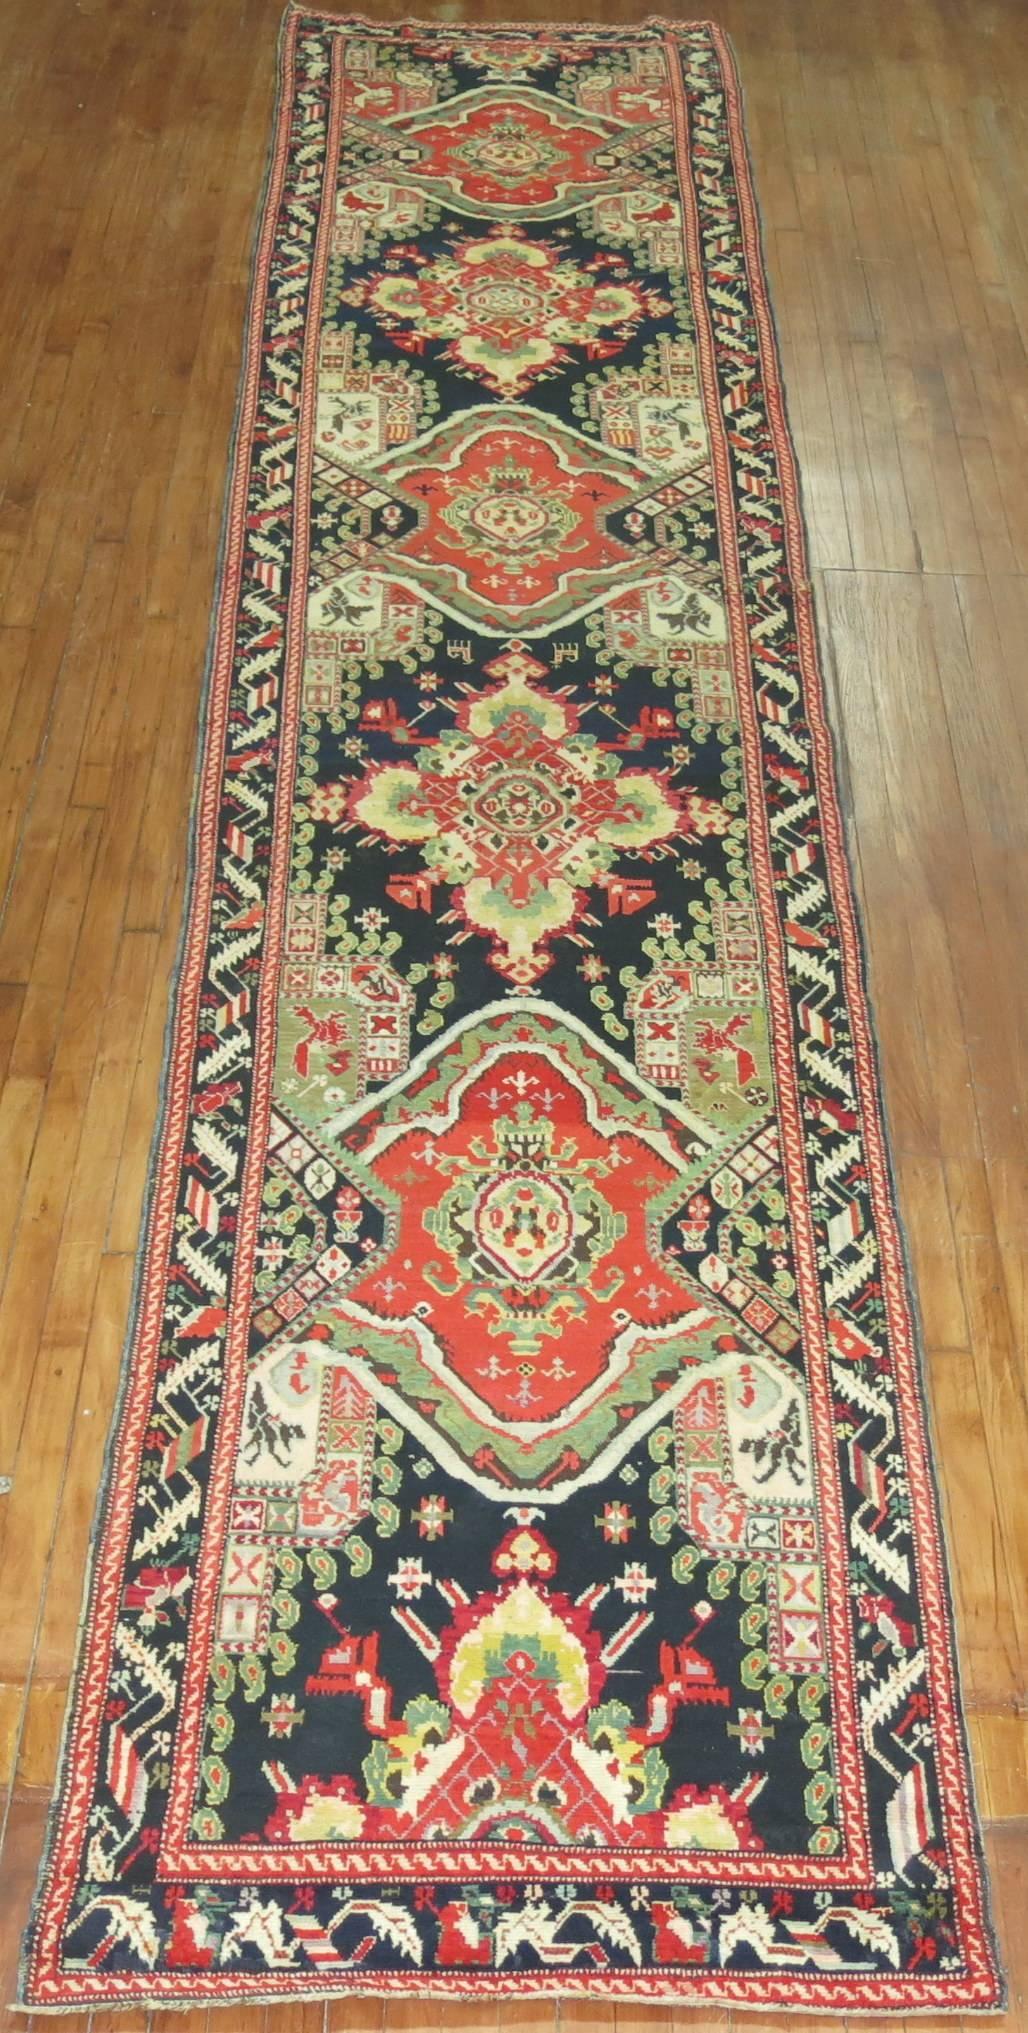 An early 20th century Russian Karabagh runner, predominant accents in red, yellow, and green on a black colored field and border.

3'6'' x 18'

Karabagh are one of the more popular types of Caucasian rugs that were woven on the higher mountain